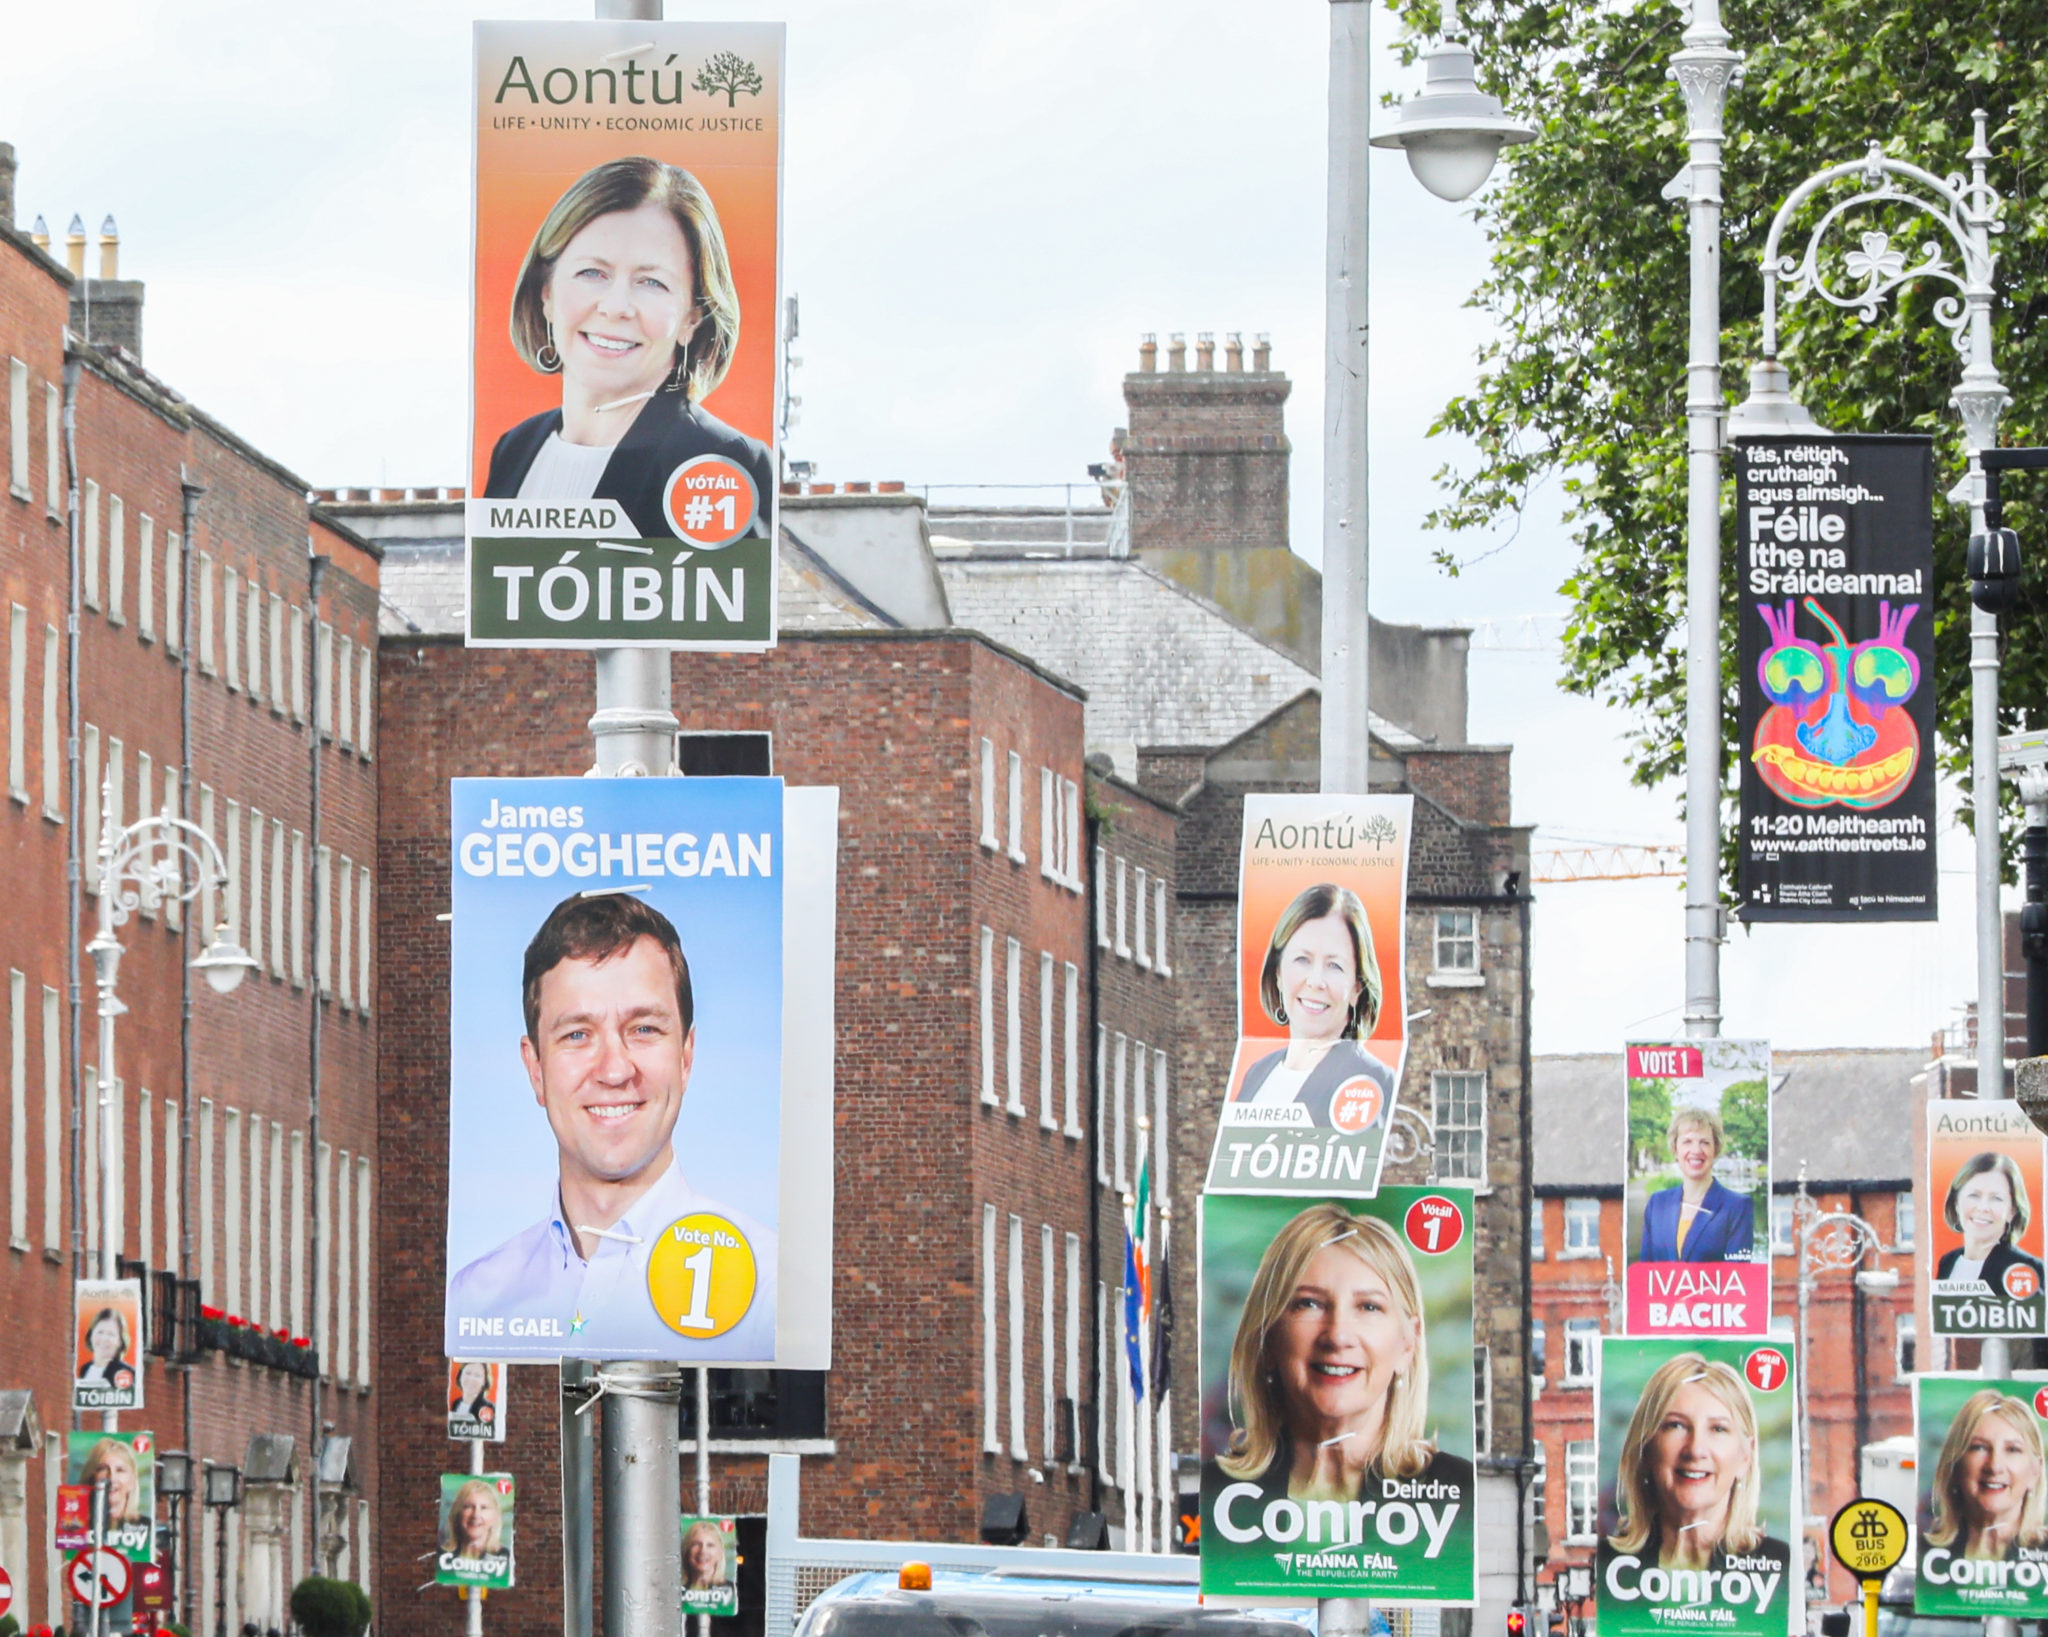 Posters for candidates in the upcoming Dublin Bay South by-election on Dublin's Merrion Street. 